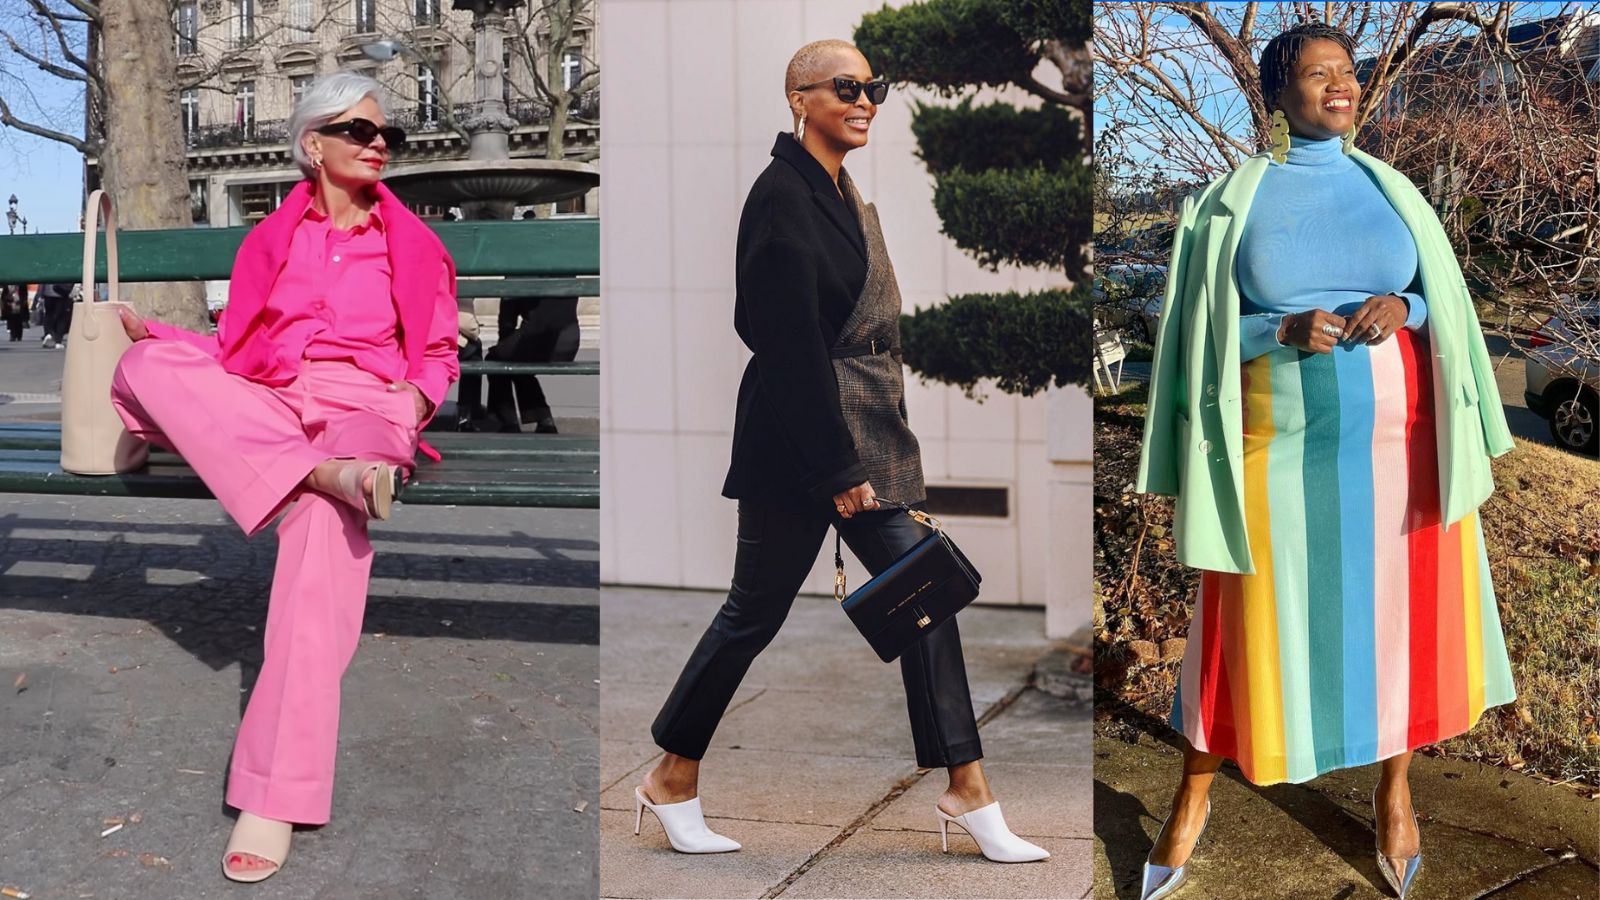 Best Petite Clothing Brands According To Influencers